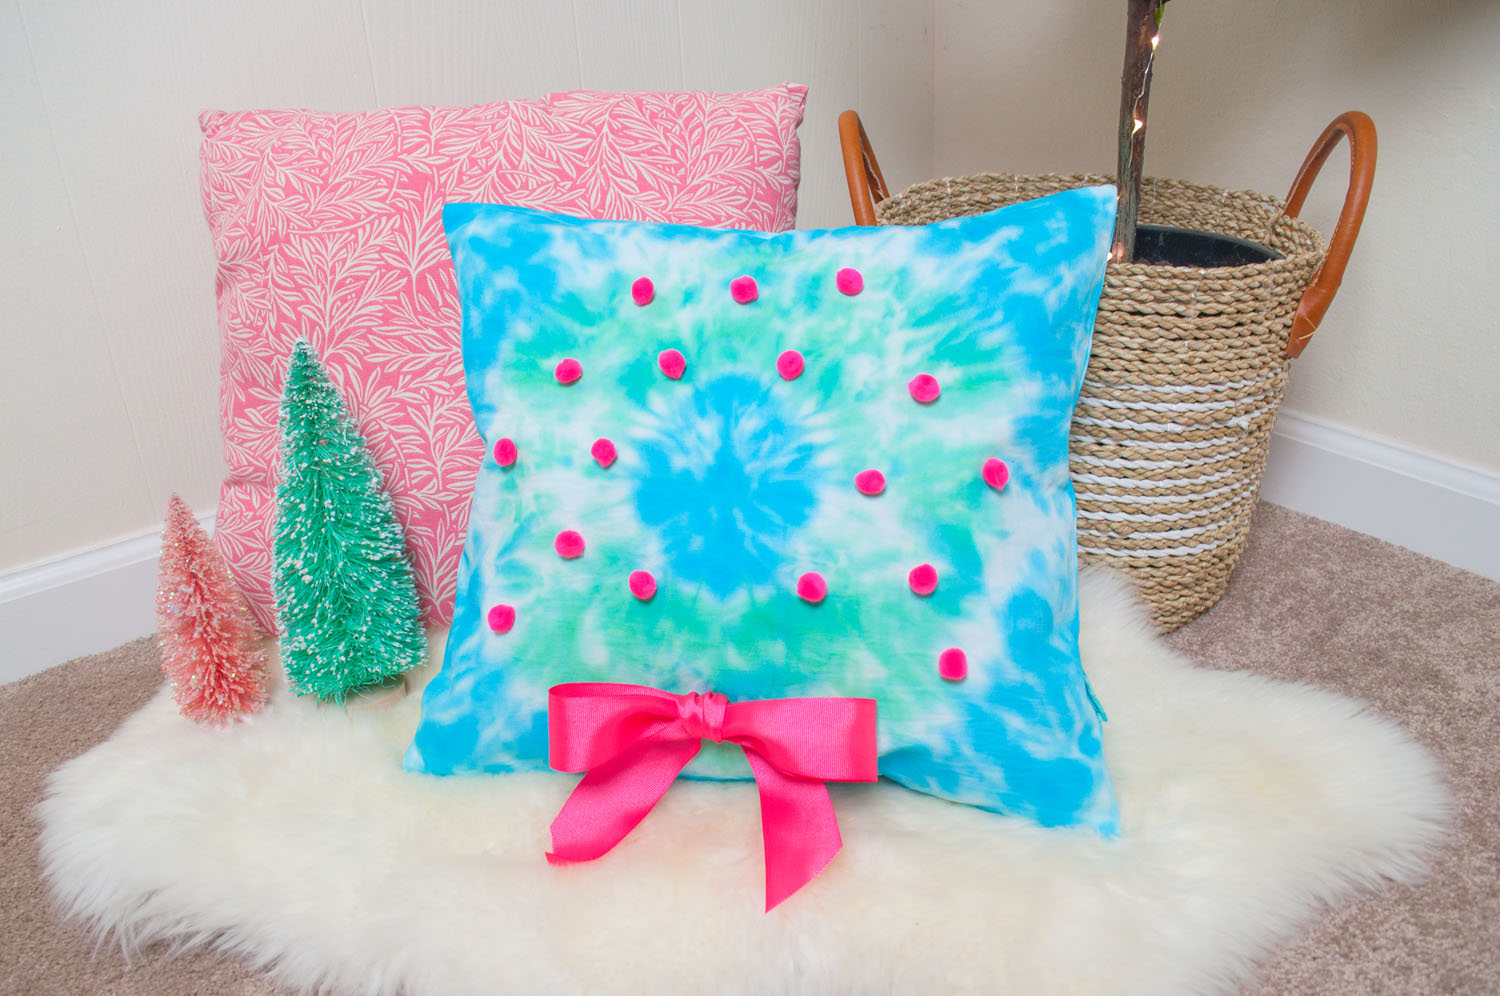 Heart Pillow Tie Dye with Patches DIY Kit